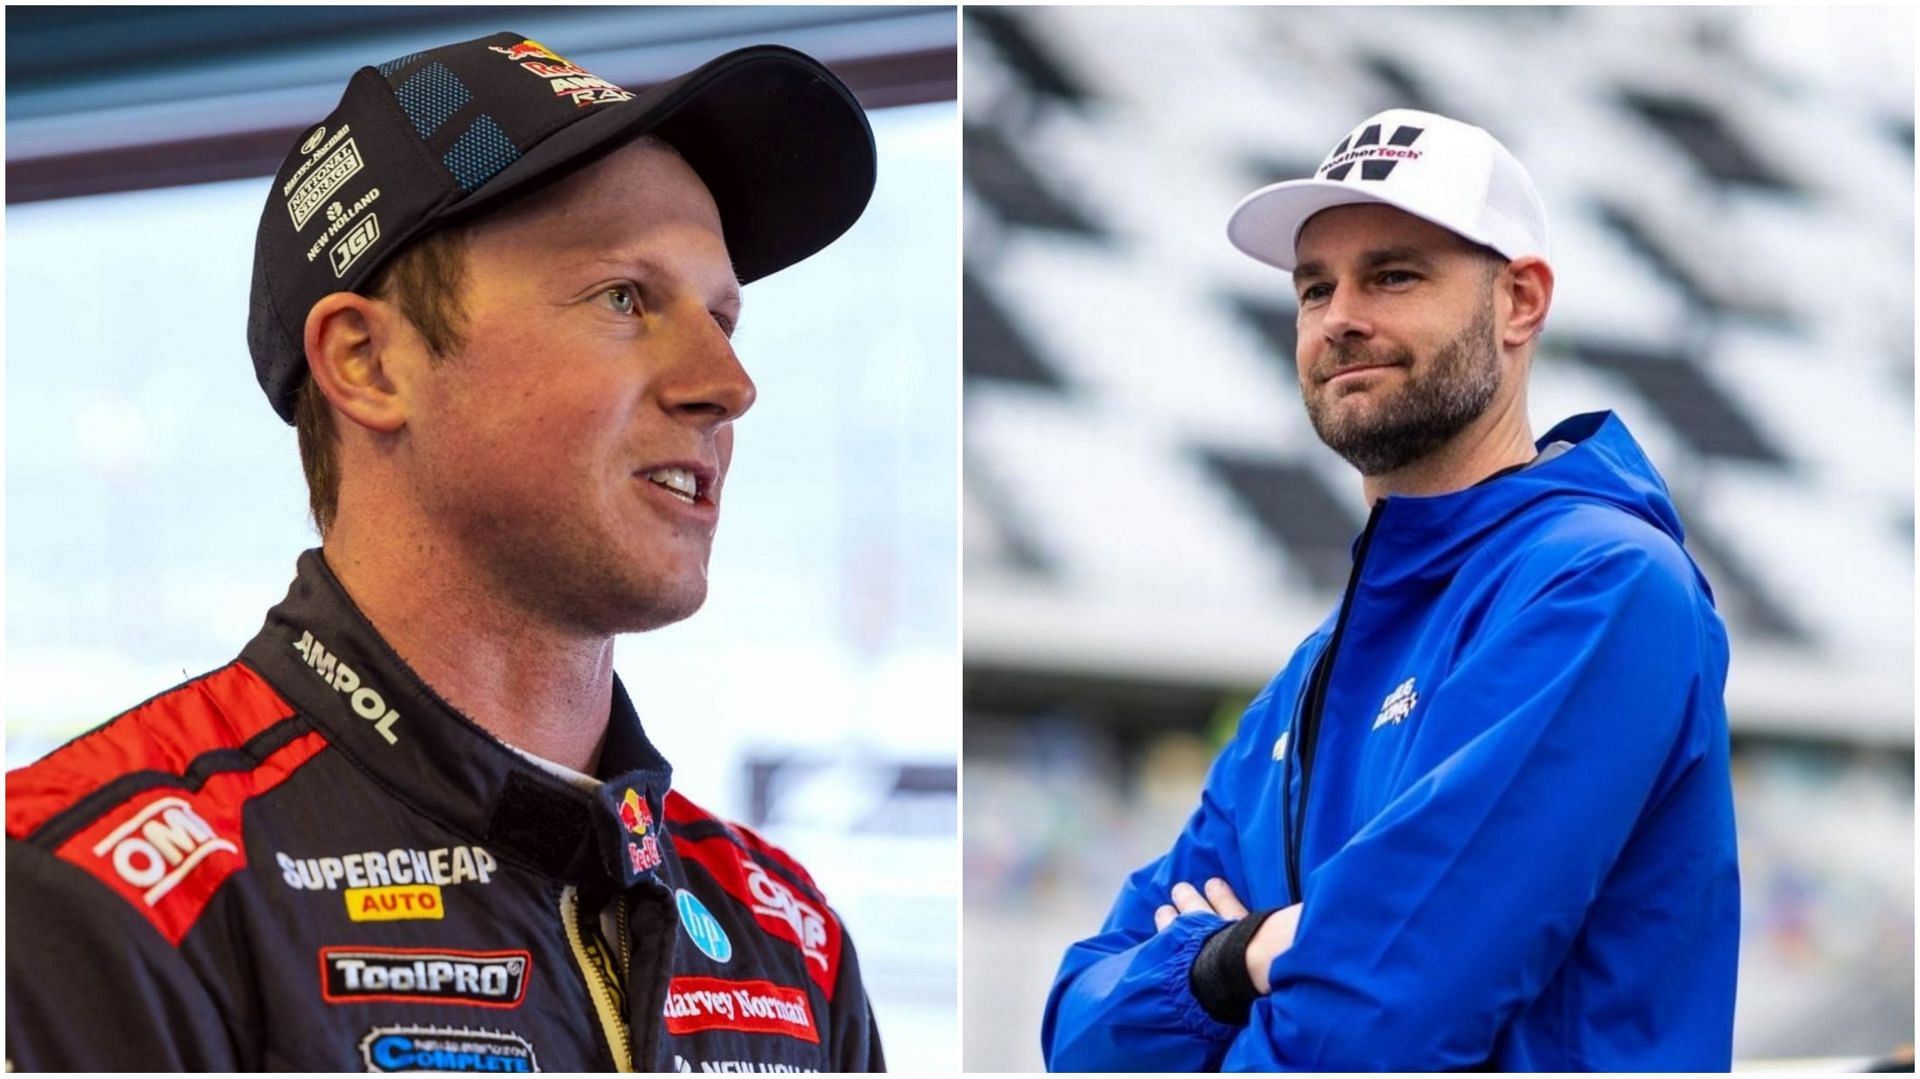 Following the footsteps of Shane van Gisbergen, Supercars driver Will Brown is set to make his NASCAR debut (Image from Instagram)